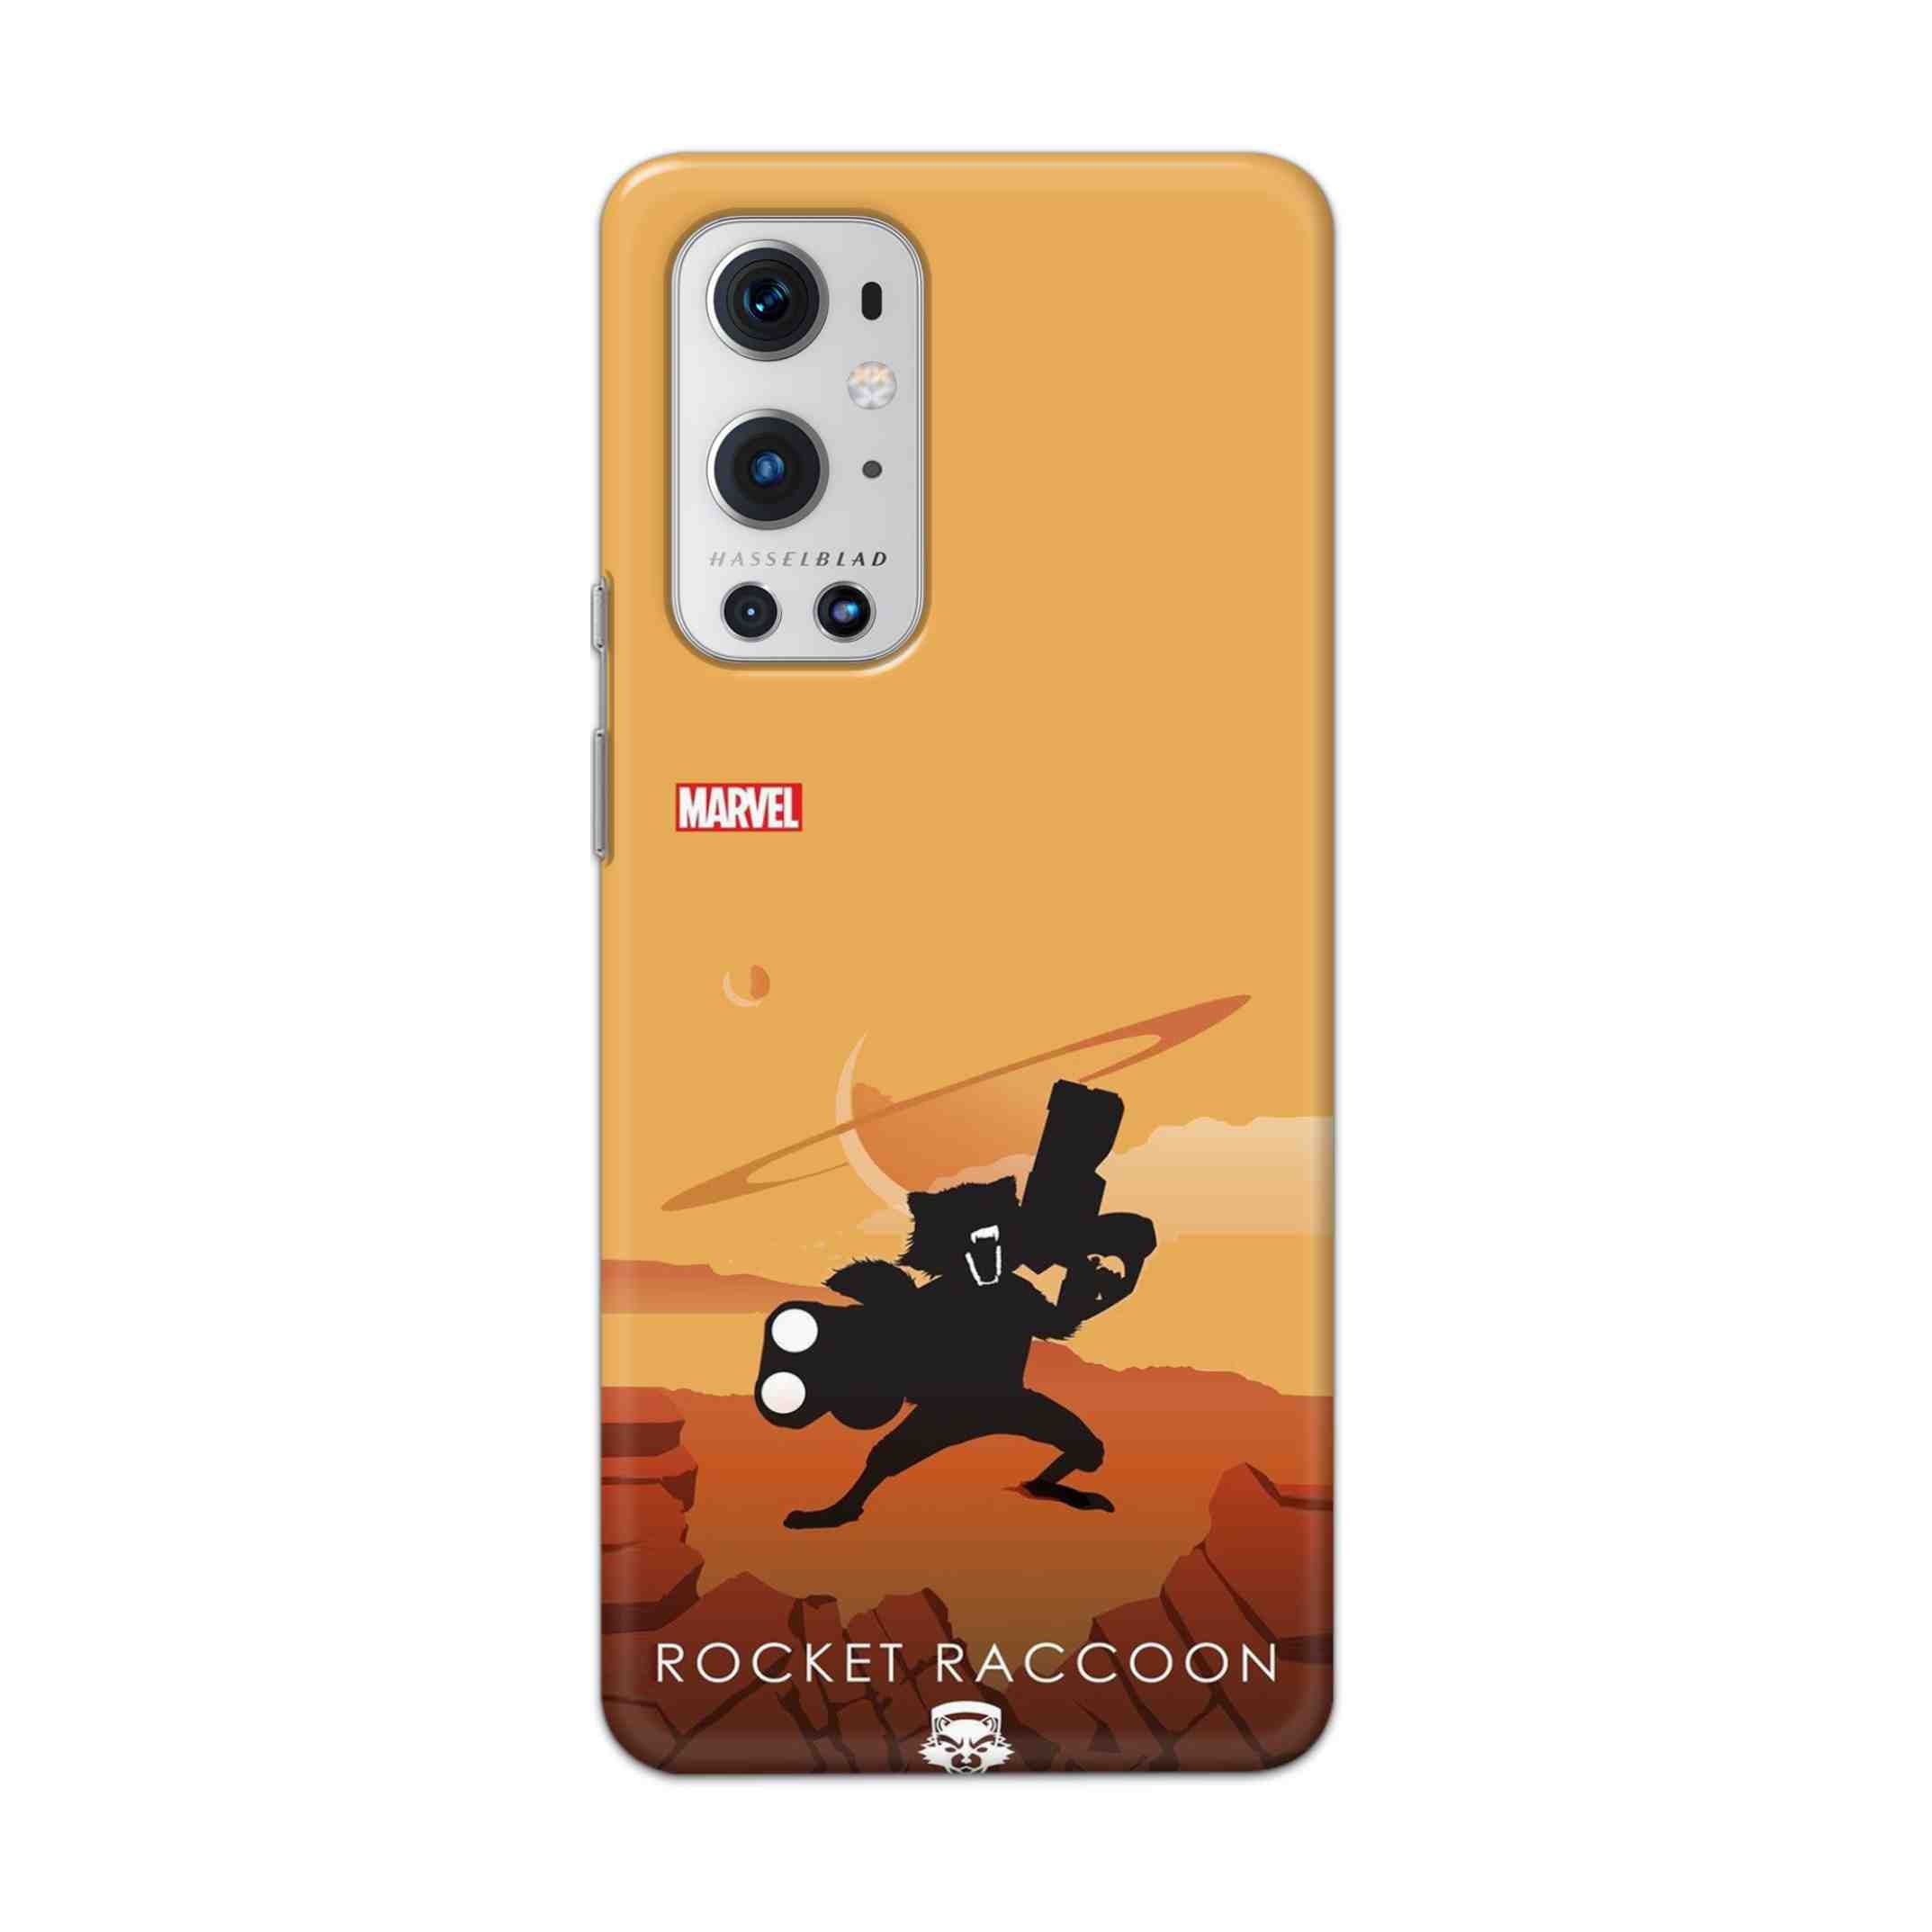 Buy Rocket Raccoon Hard Back Mobile Phone Case Cover For OnePlus 9 Pro Online